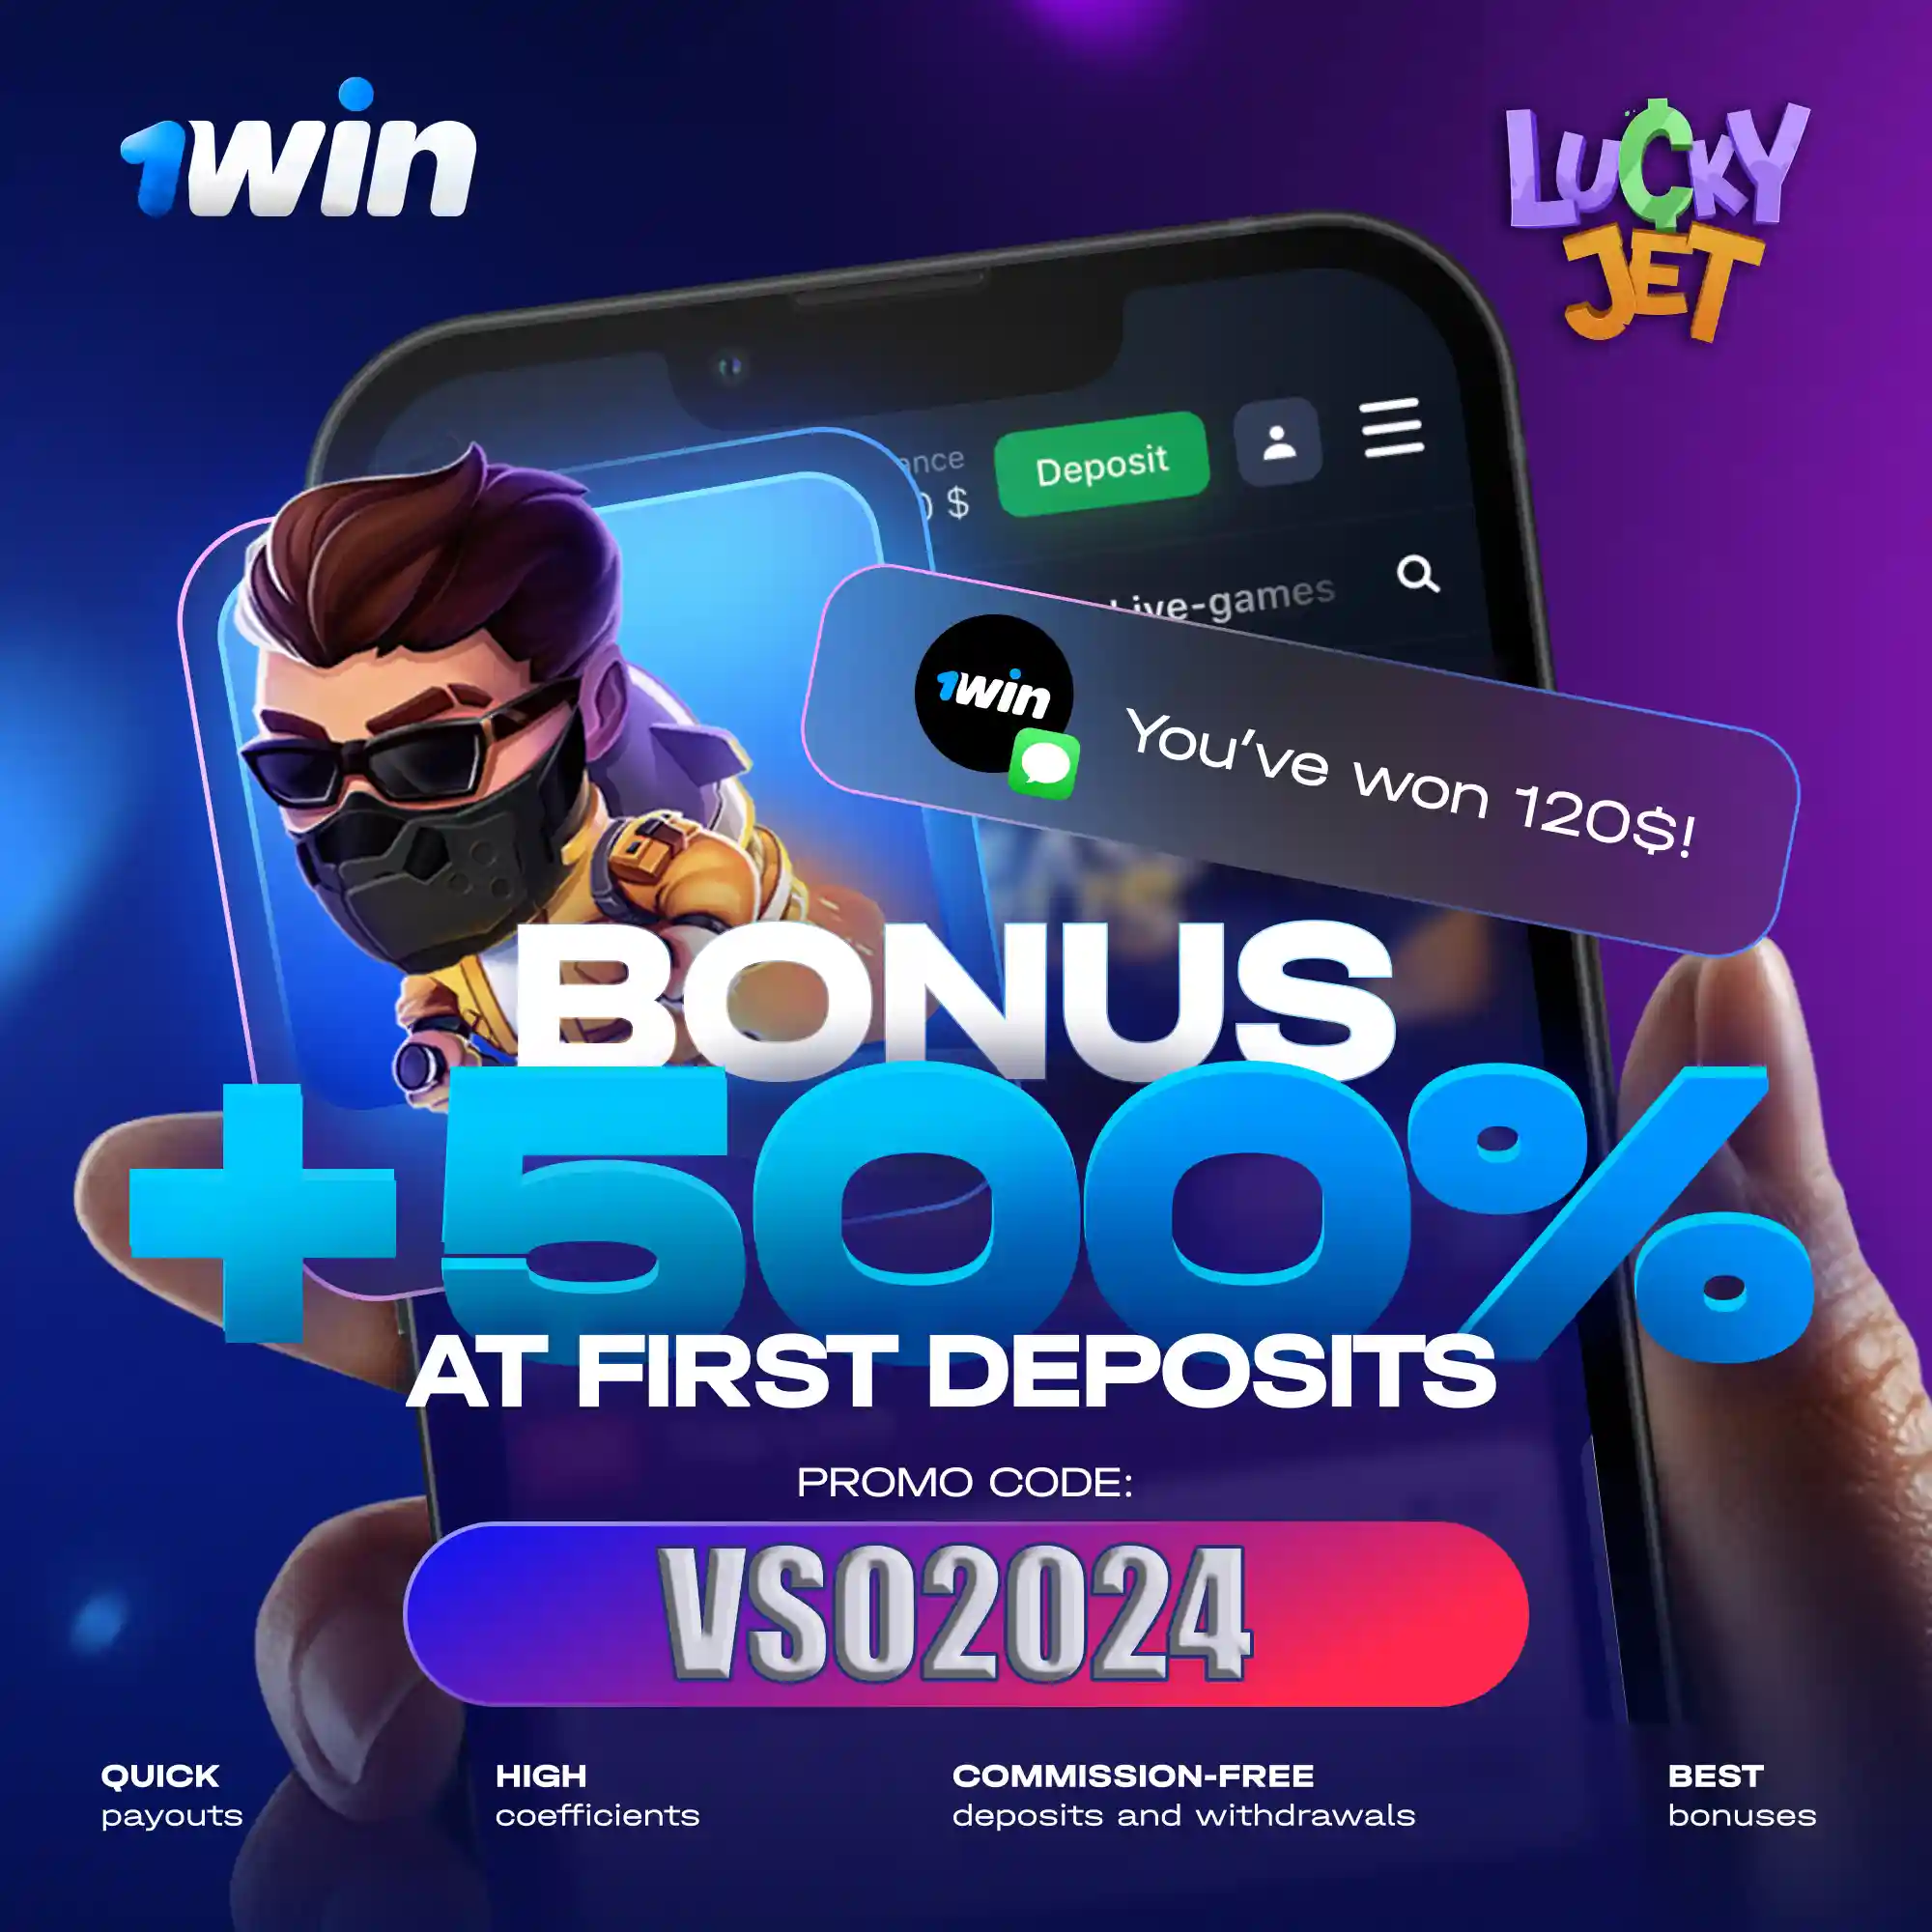 1win Free Spins Bonuses in Vegas-Slots-Online.com: Your Ticket to Excitement and Big Wins!